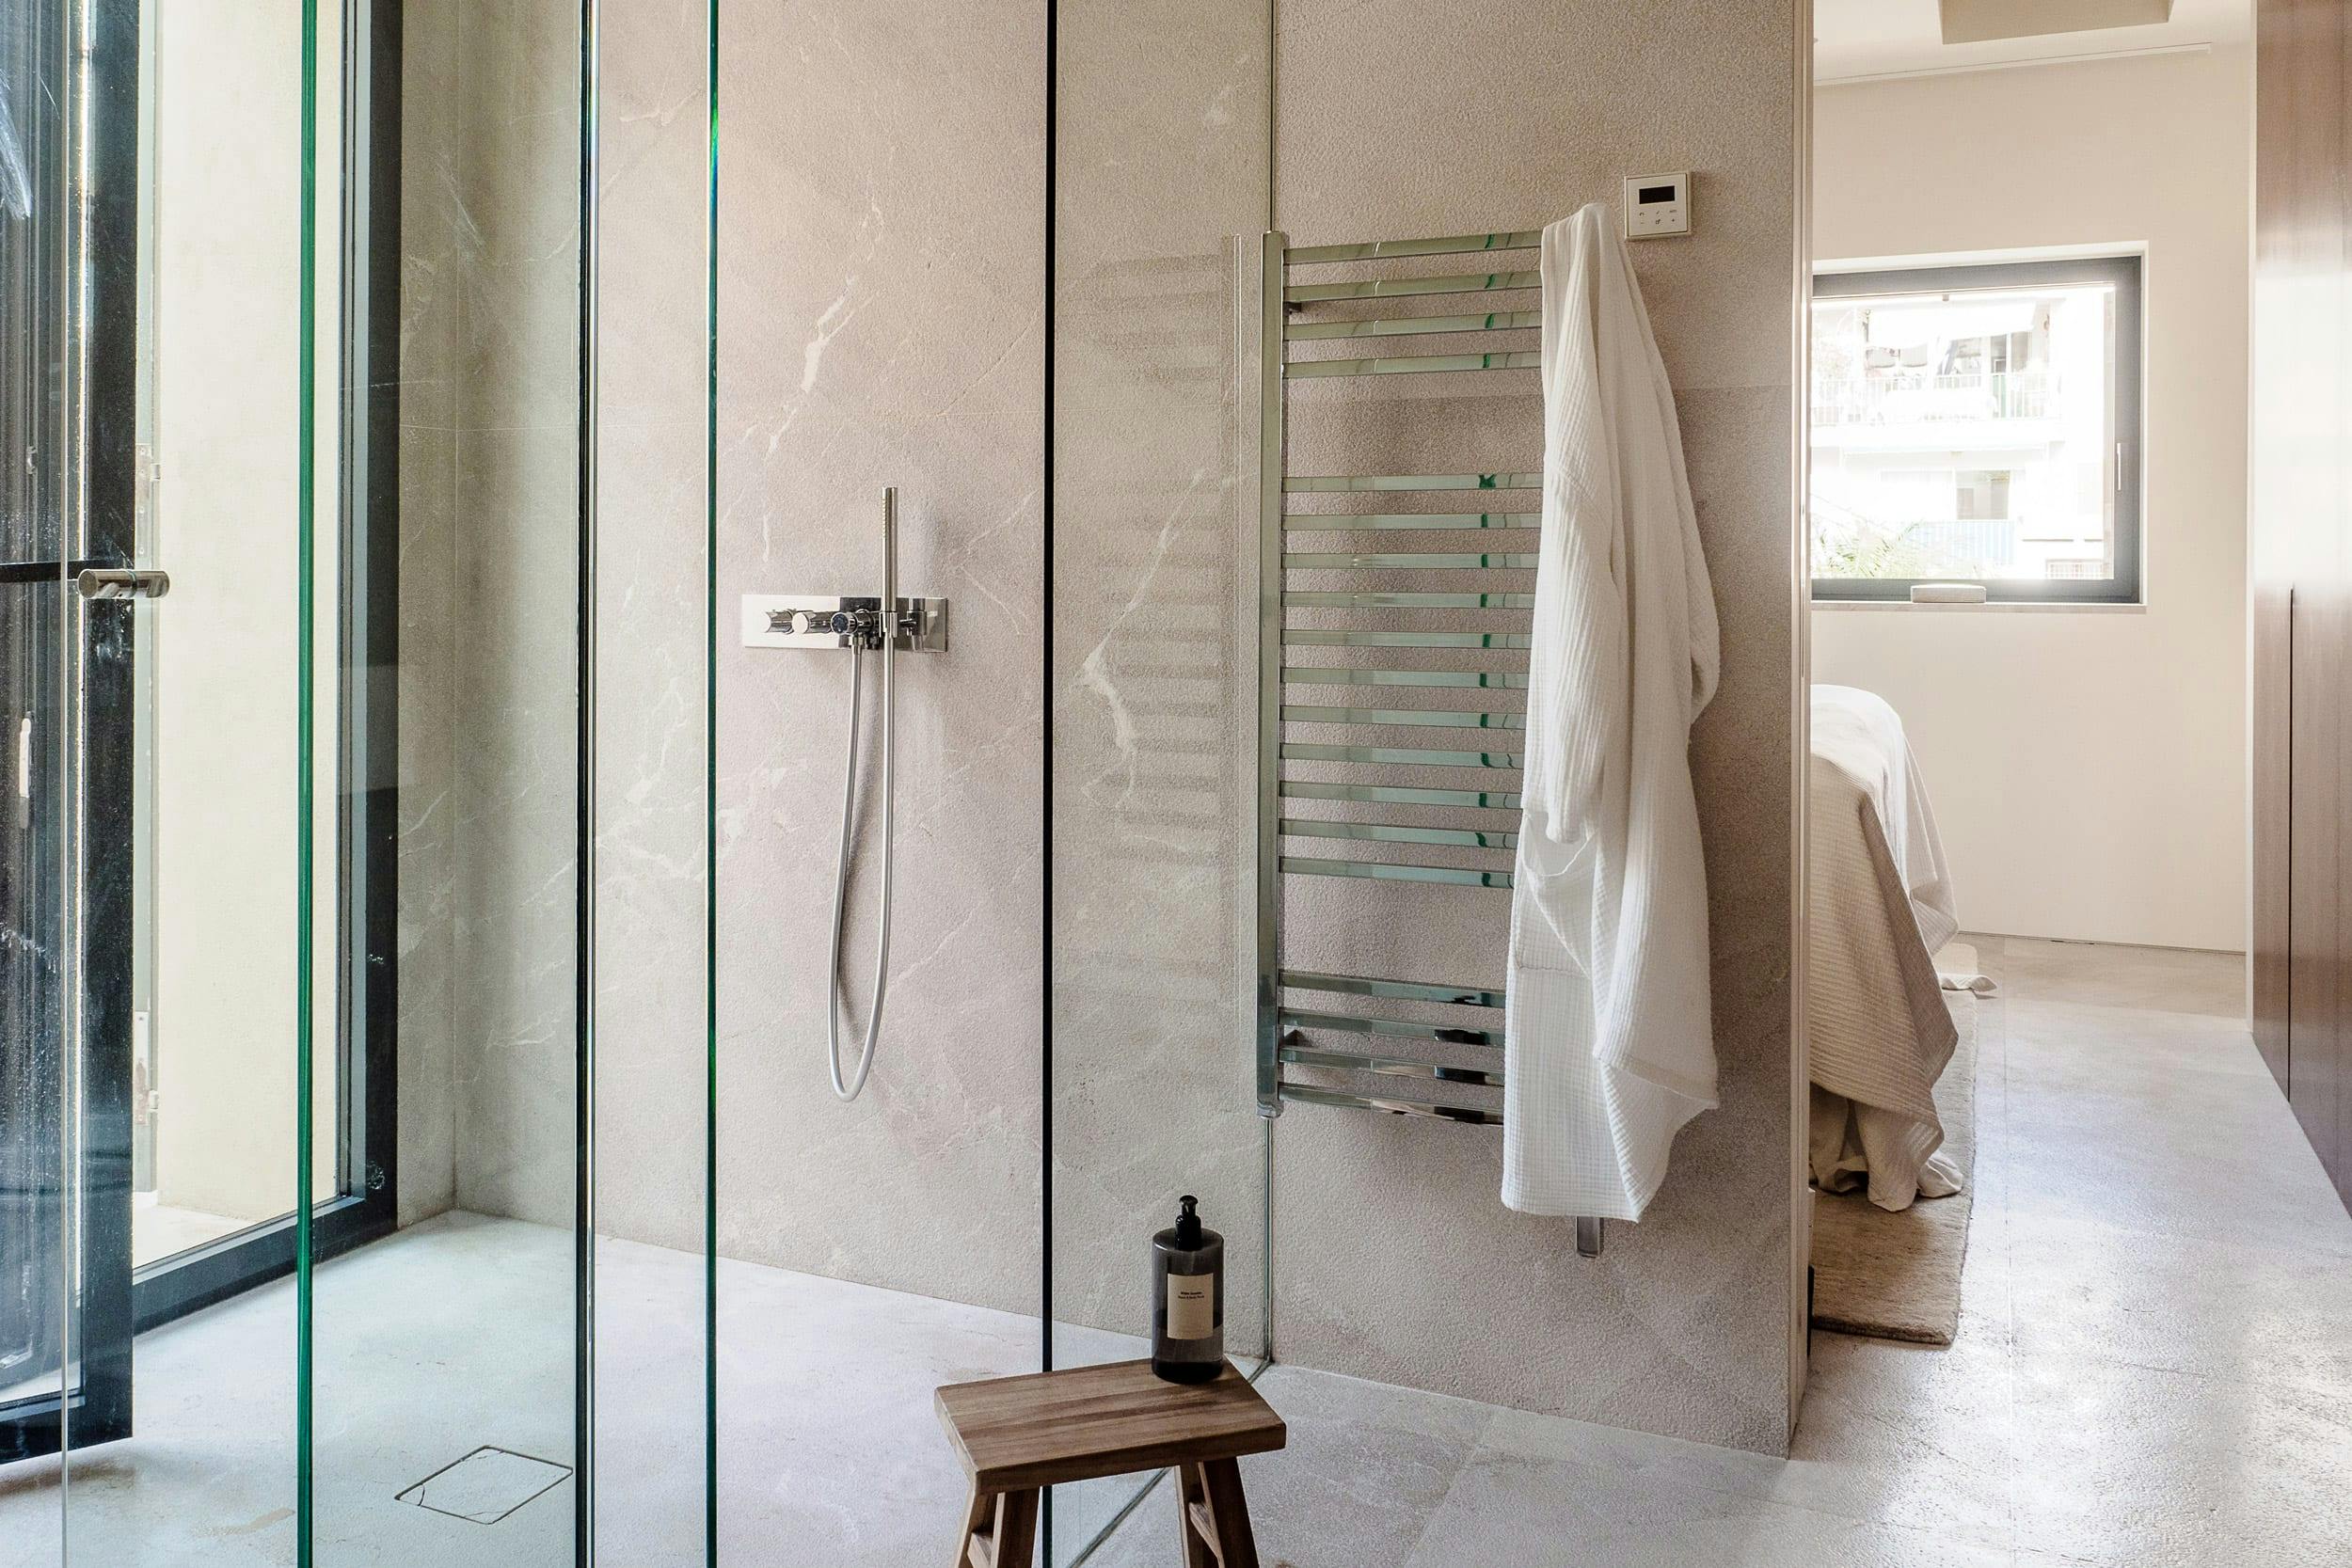 The image features a modern, clean bathroom with a glass shower stall, a towel rack, and a towel on the rack.